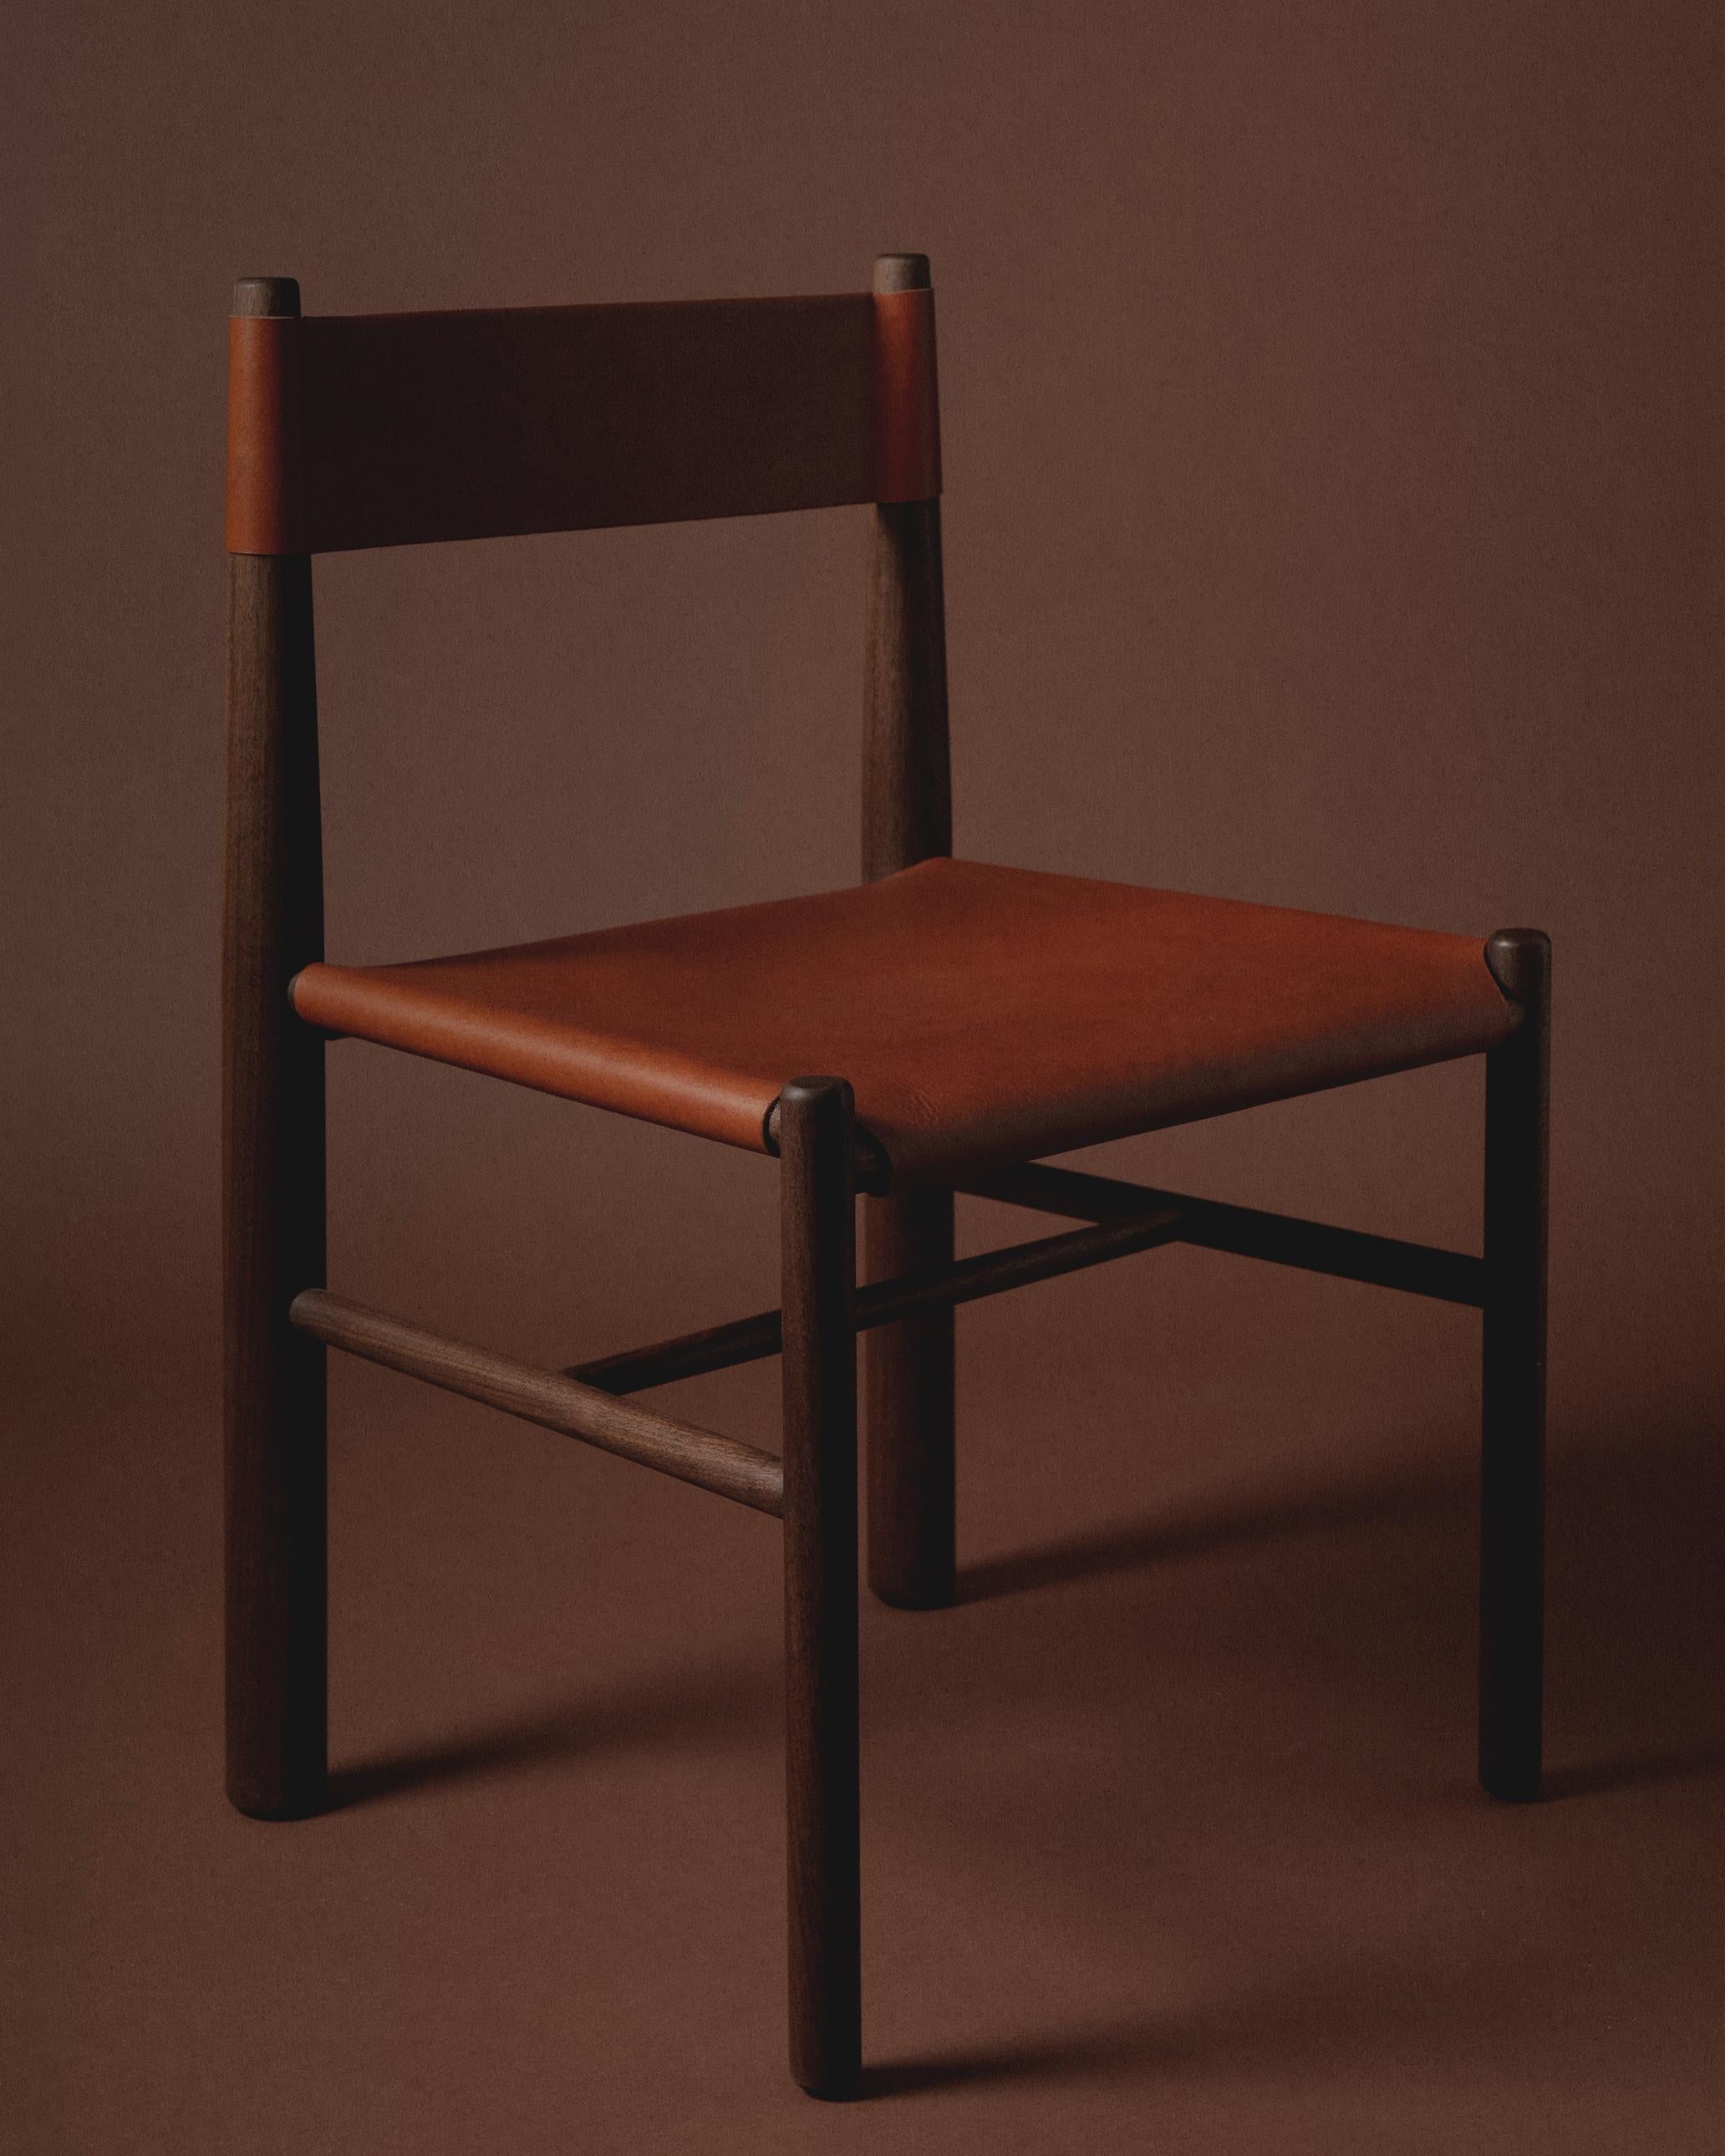 Inspired by utilitarian furniture, the Gradual Chair plays with the proportions of different size turned wood parts. The front and back legs are different diameters, and the back tapers, declining gradually to allow for a slung leather back. Leather